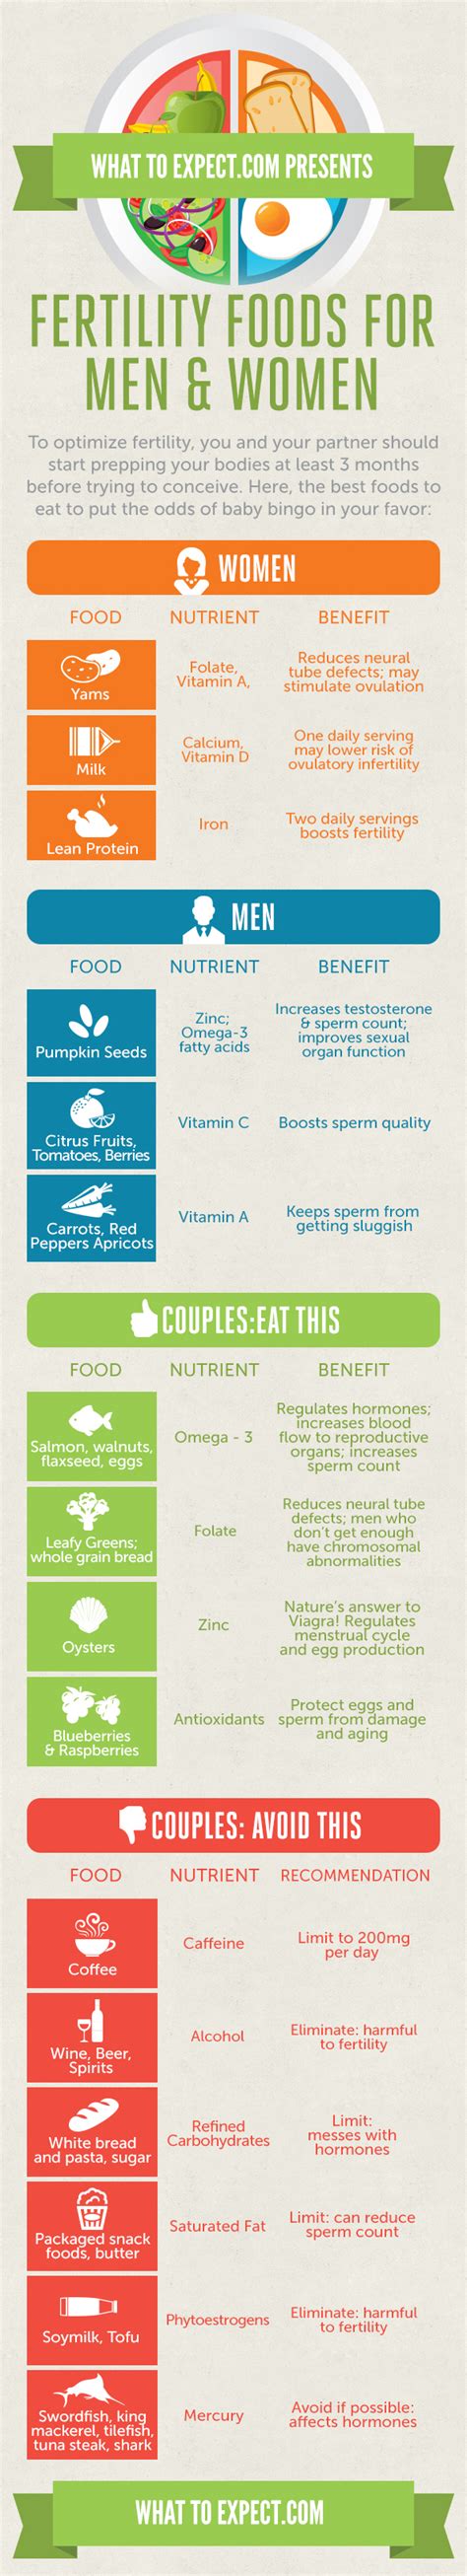 Fertility Foods For Men And Women Infographic What To Expect